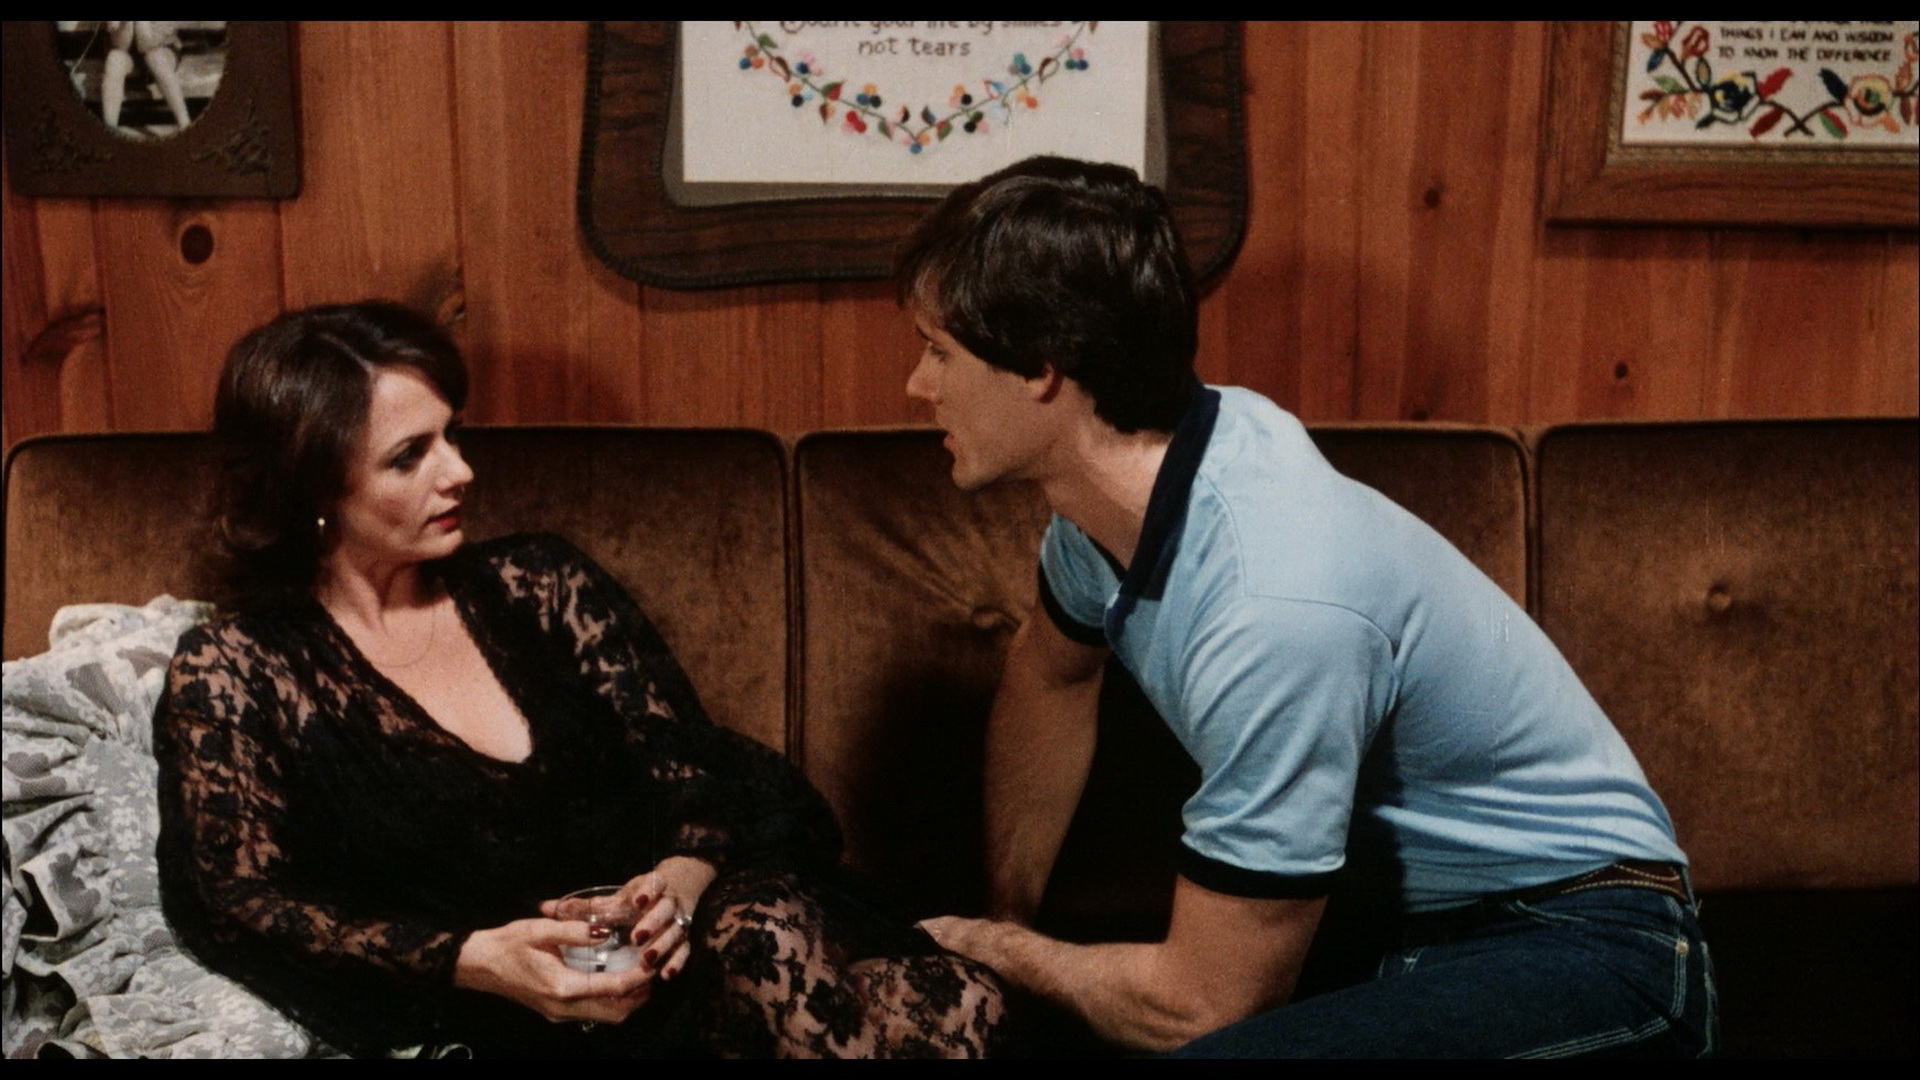 With The Most Memorable Performances Being Kay Parker Sexworld In The Role Of Barbara The Mother And Jerry Butler Snake